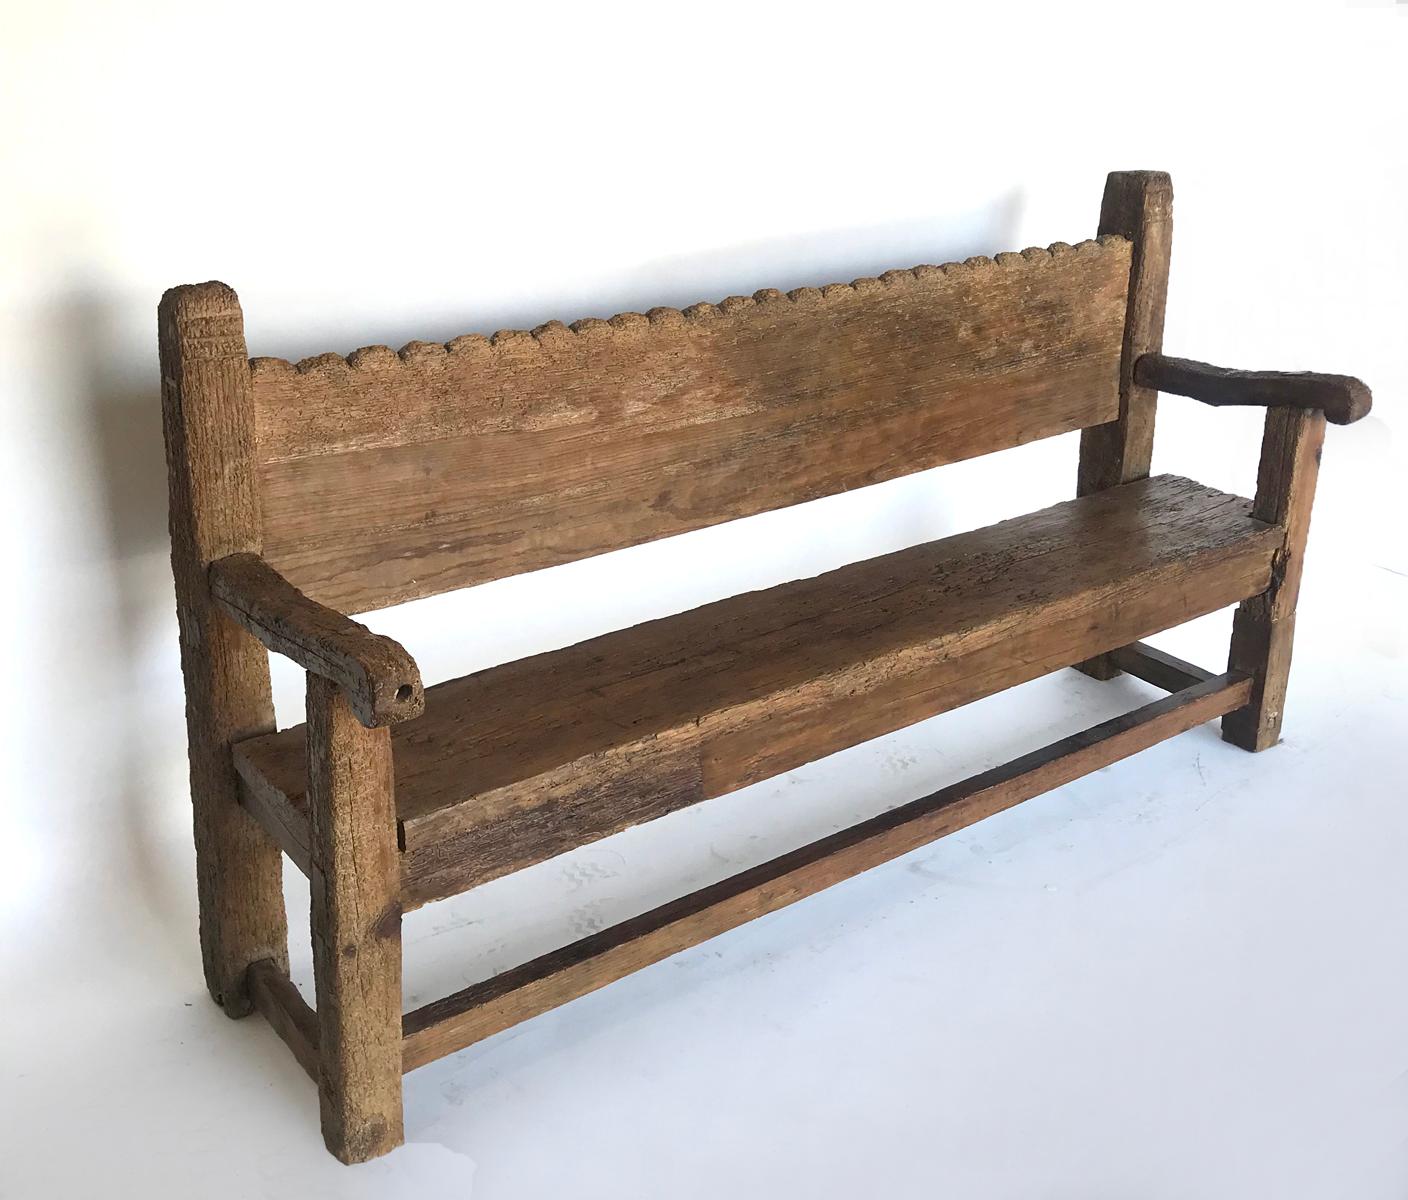 All original, very rustic Chajul bench from the highlands of Guatemala. Mortise and tenon construction. Seat and back both consists of wide boards that have been traditionally hand hewn using a machete. Worn scallops along the back. Weathered and